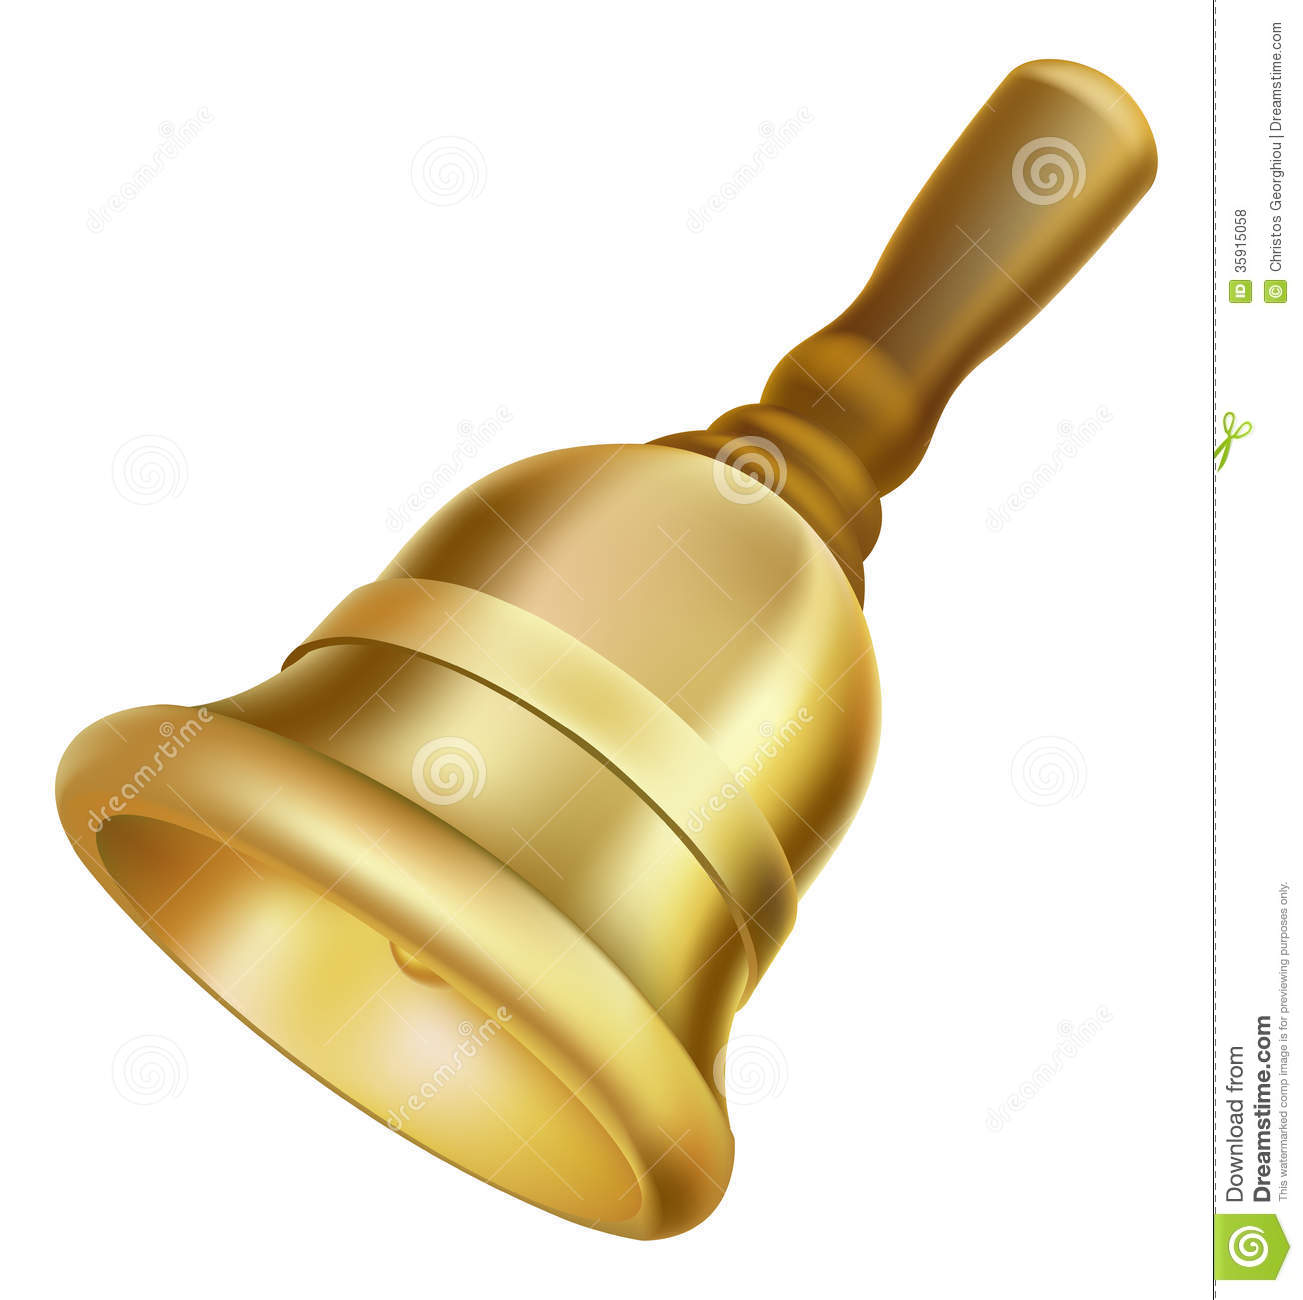     Hand Bell With A Wooden Handle  Could Be A School Bell Or Town Criers